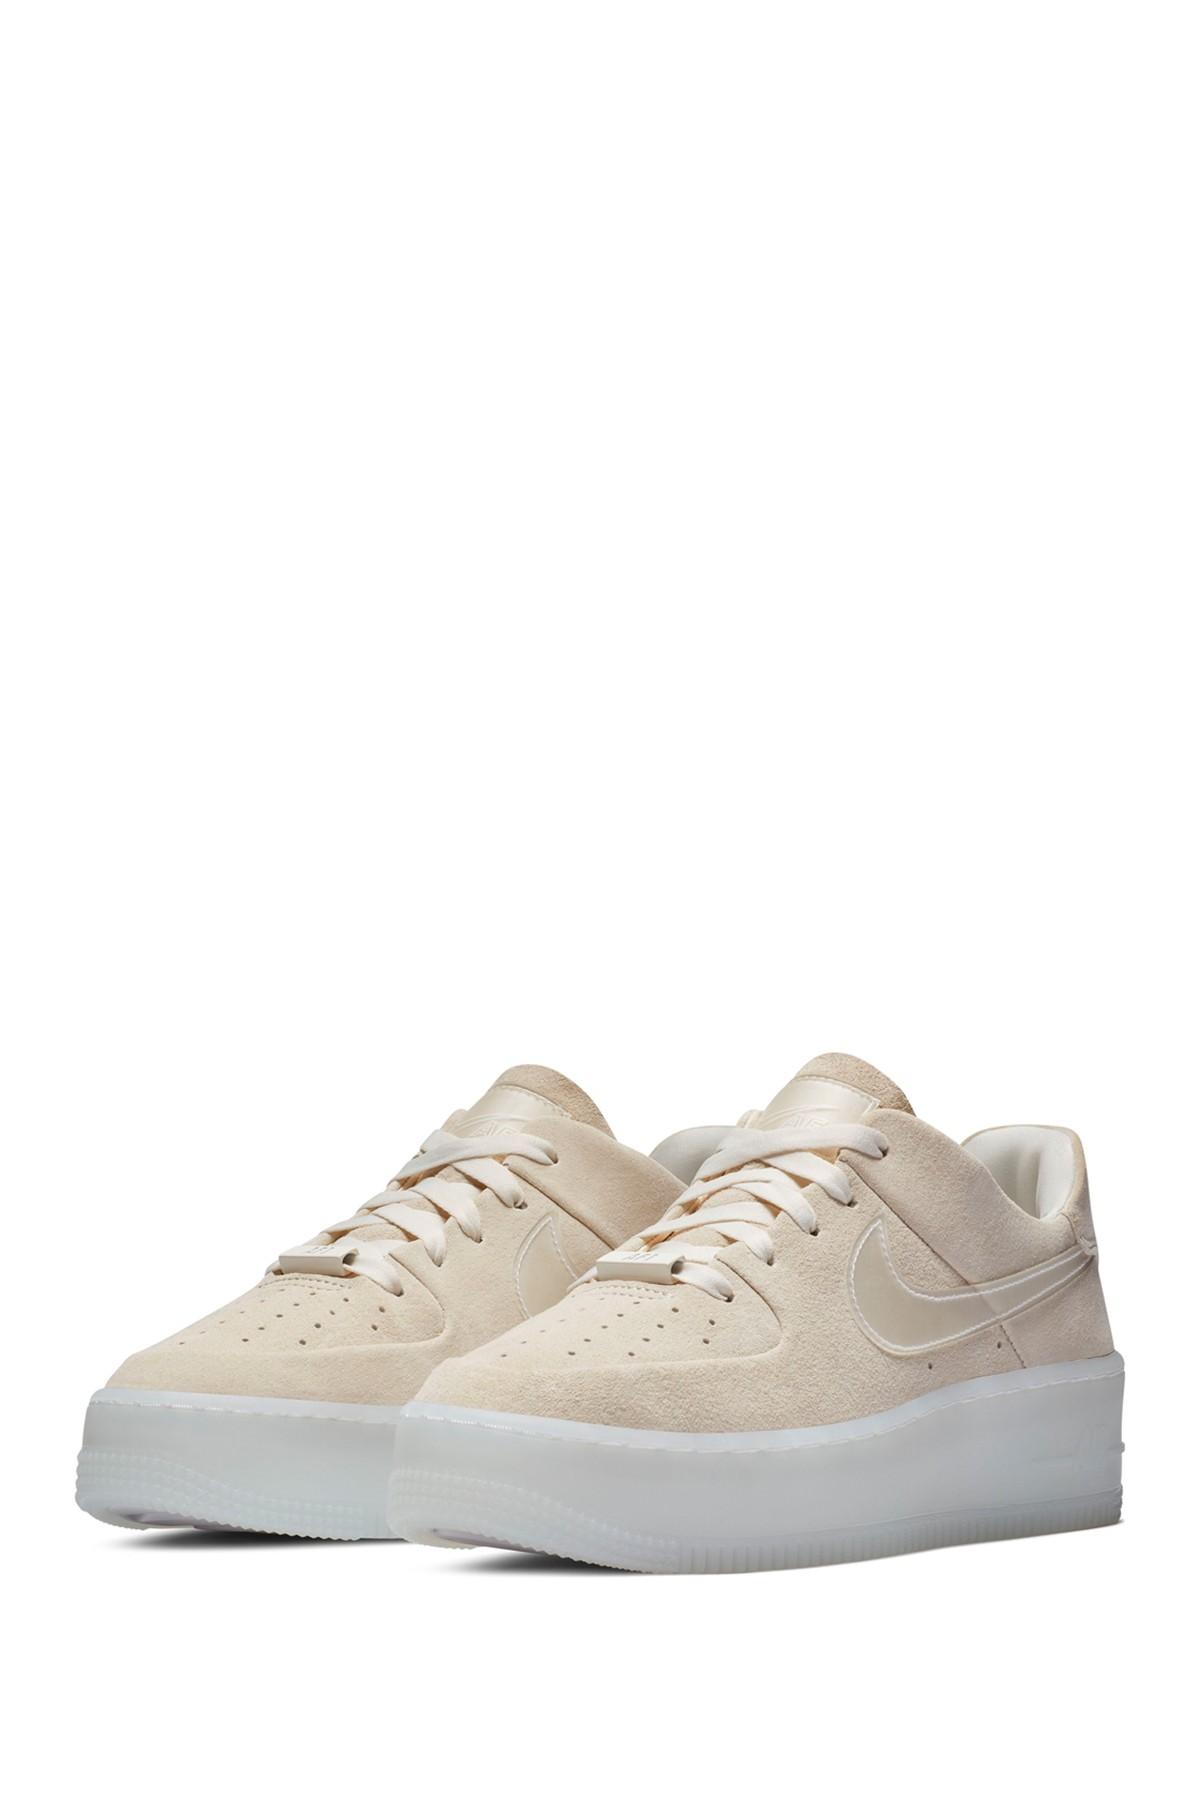 Nike Leather Air Force 1 Sage Low Lx Sneaker in White | Lyst